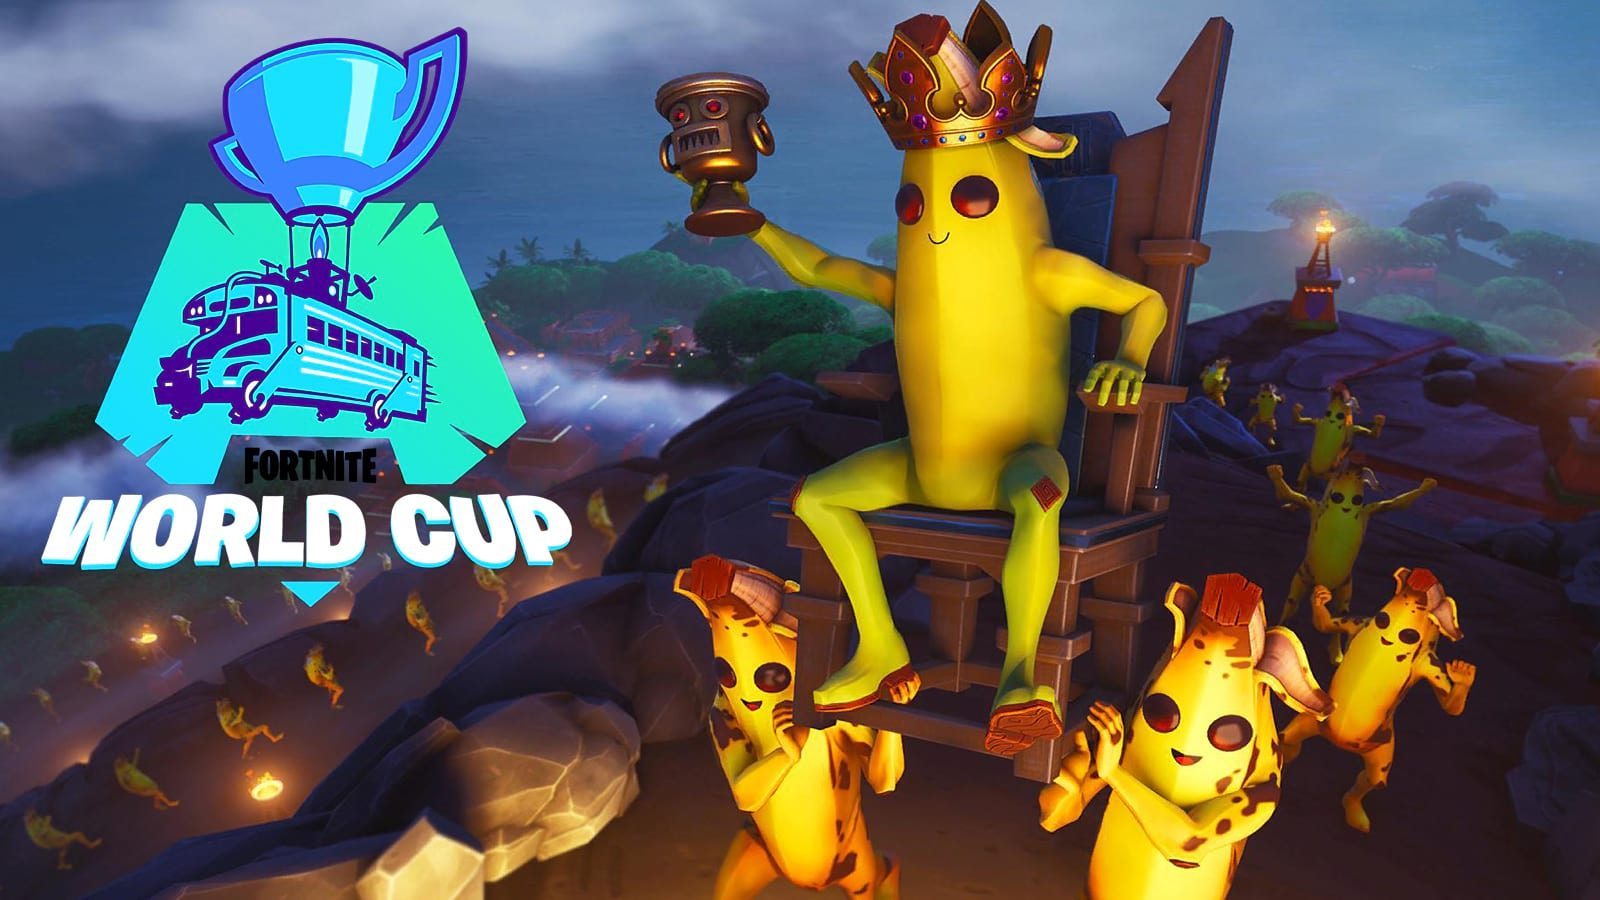 Fortnite World Cup stream loses 100K viewers, expert explains why